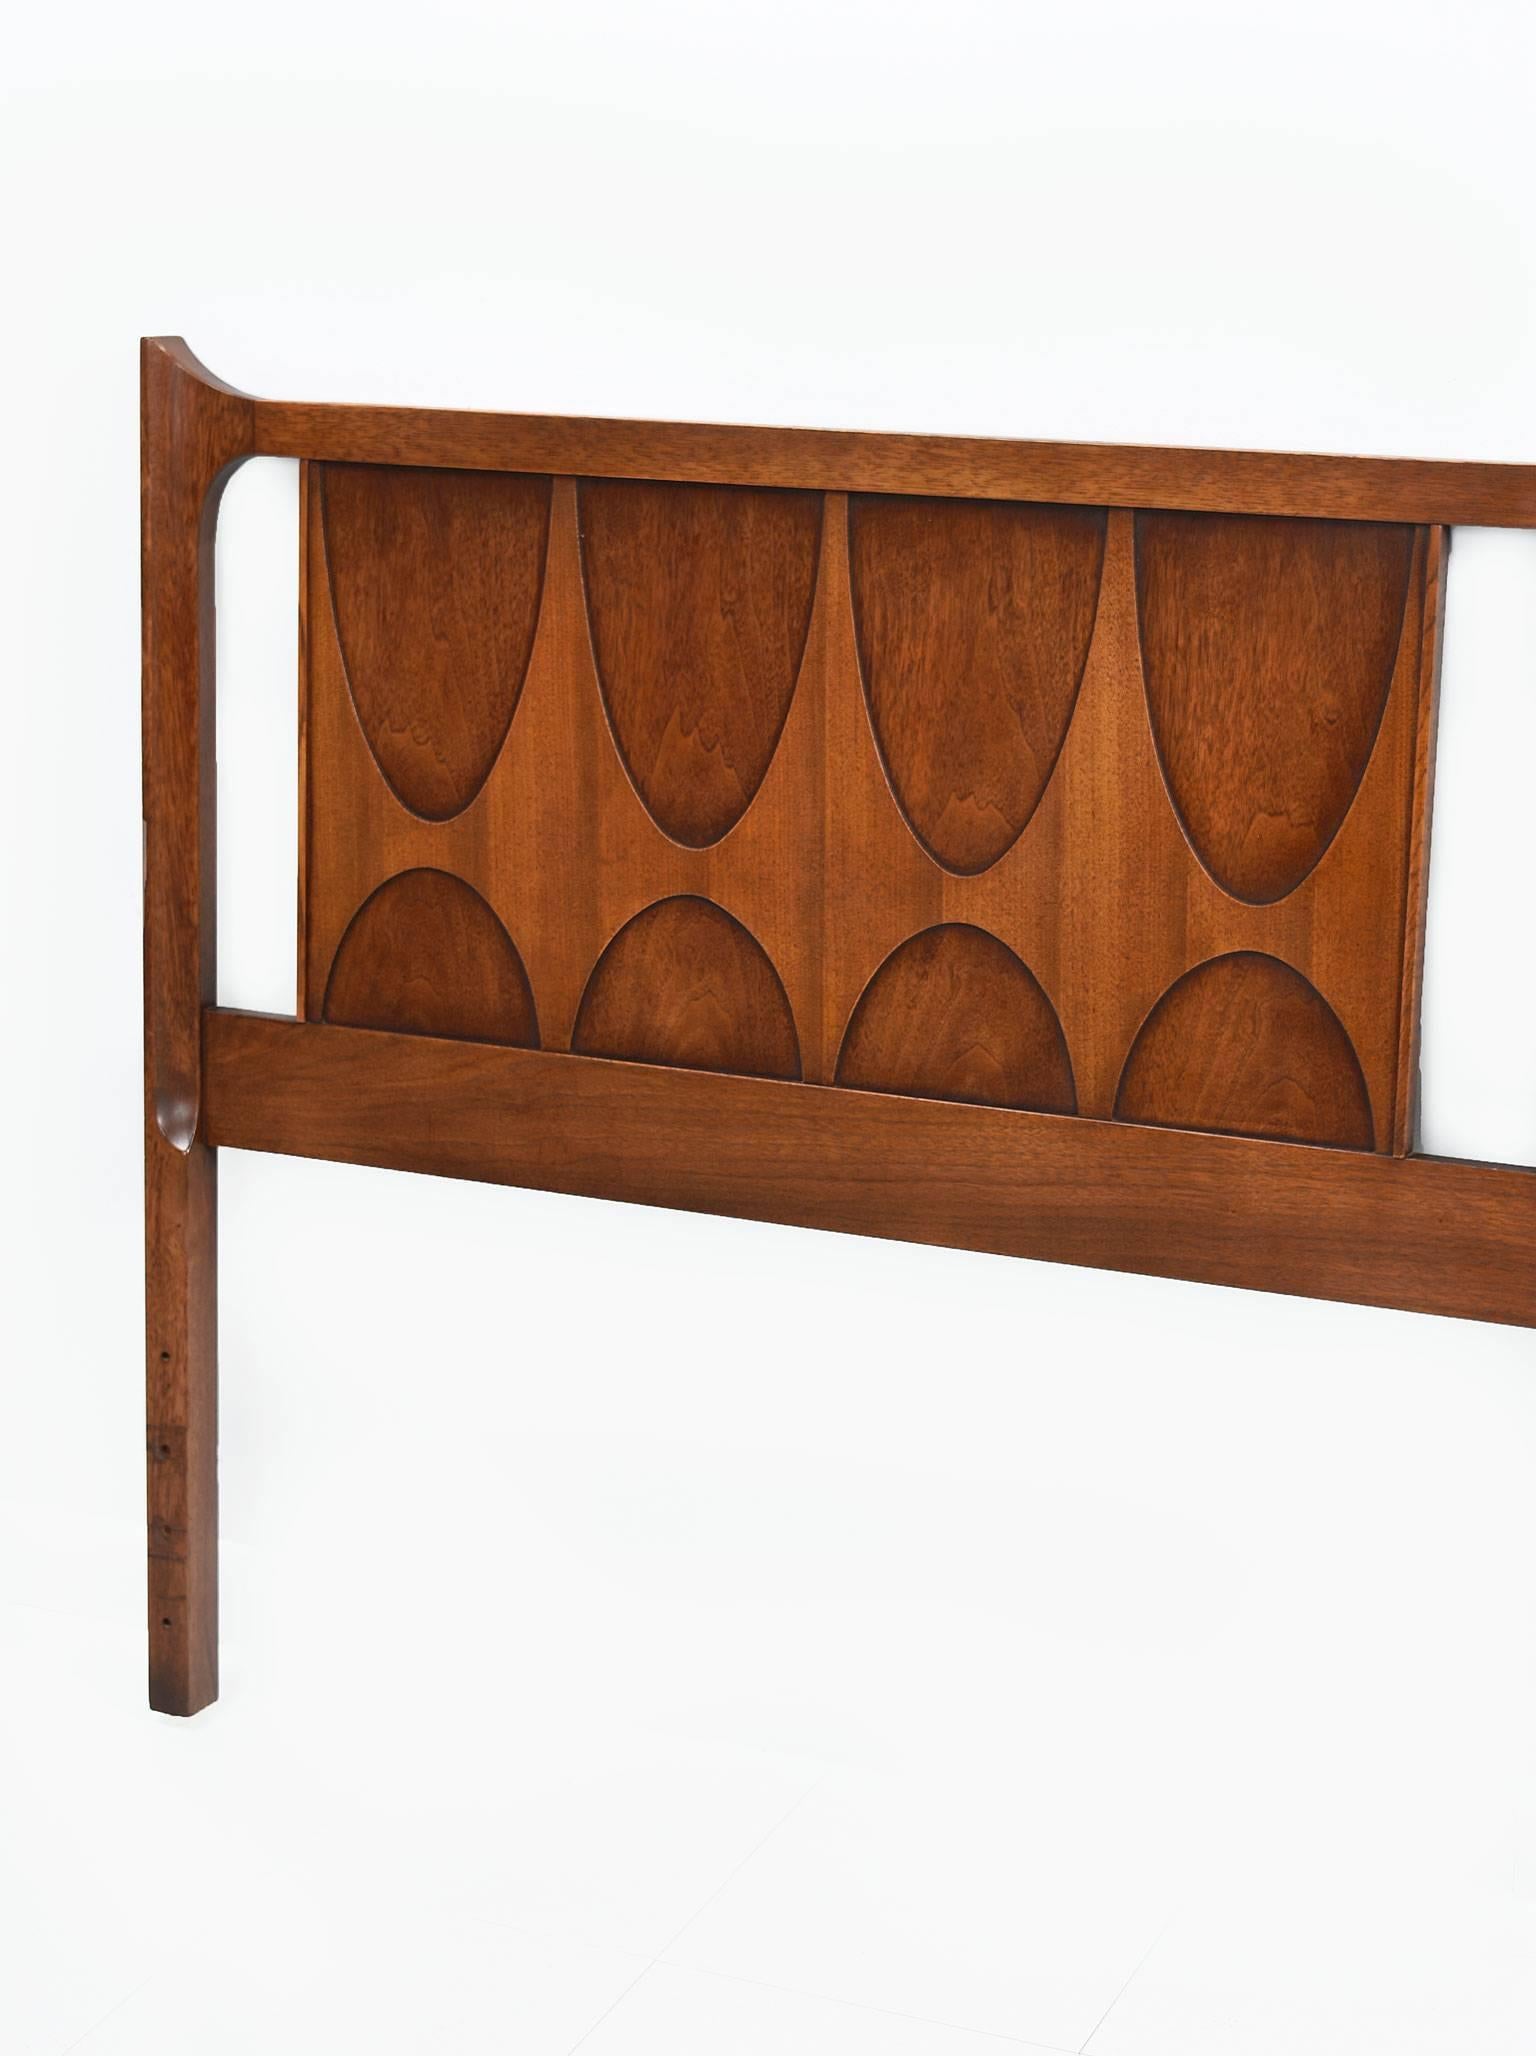 Dark walnut Broyhill Brasilia king-size panel headboard designed by famous Brazilian designer/architect Oscar Niemeyer for Broyhill in the style of Danish Modern. Superior craftsmanship and quality. American furniture manufacturer Broyhill created